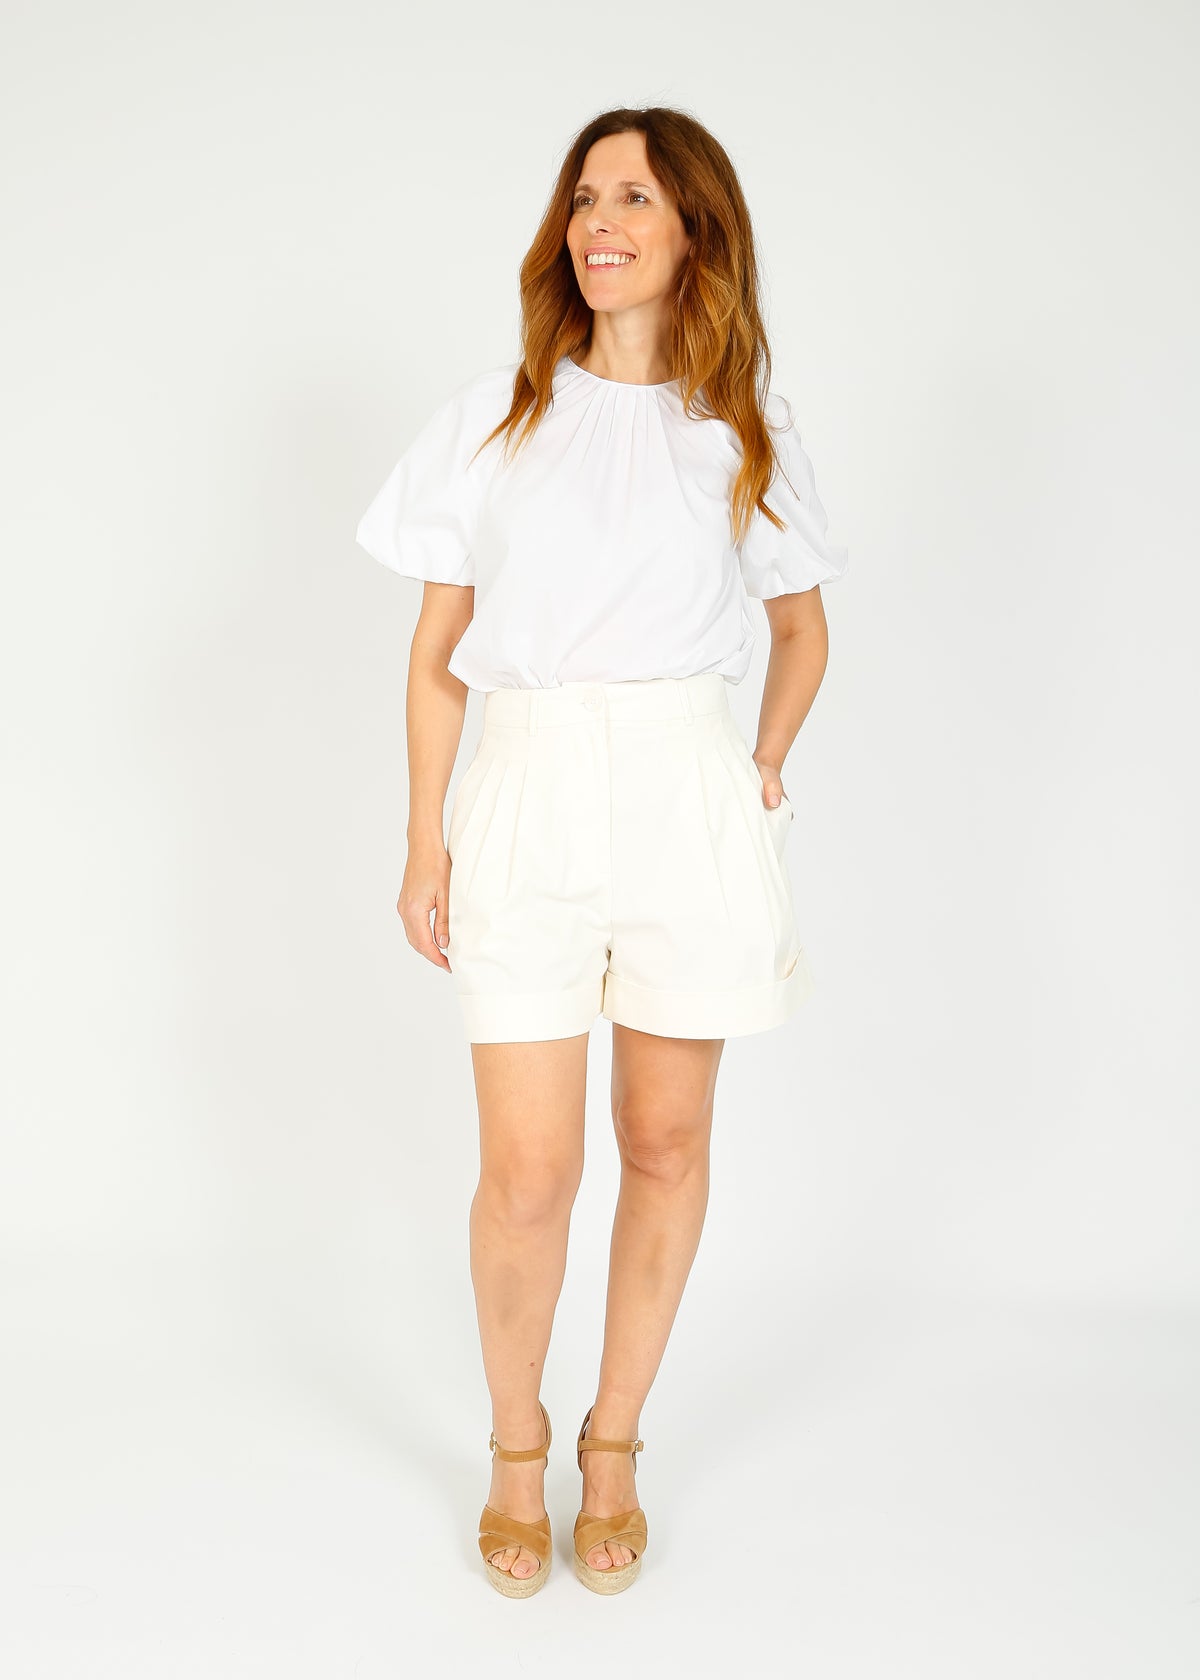 EA Fay Puff Sleeve Top in White